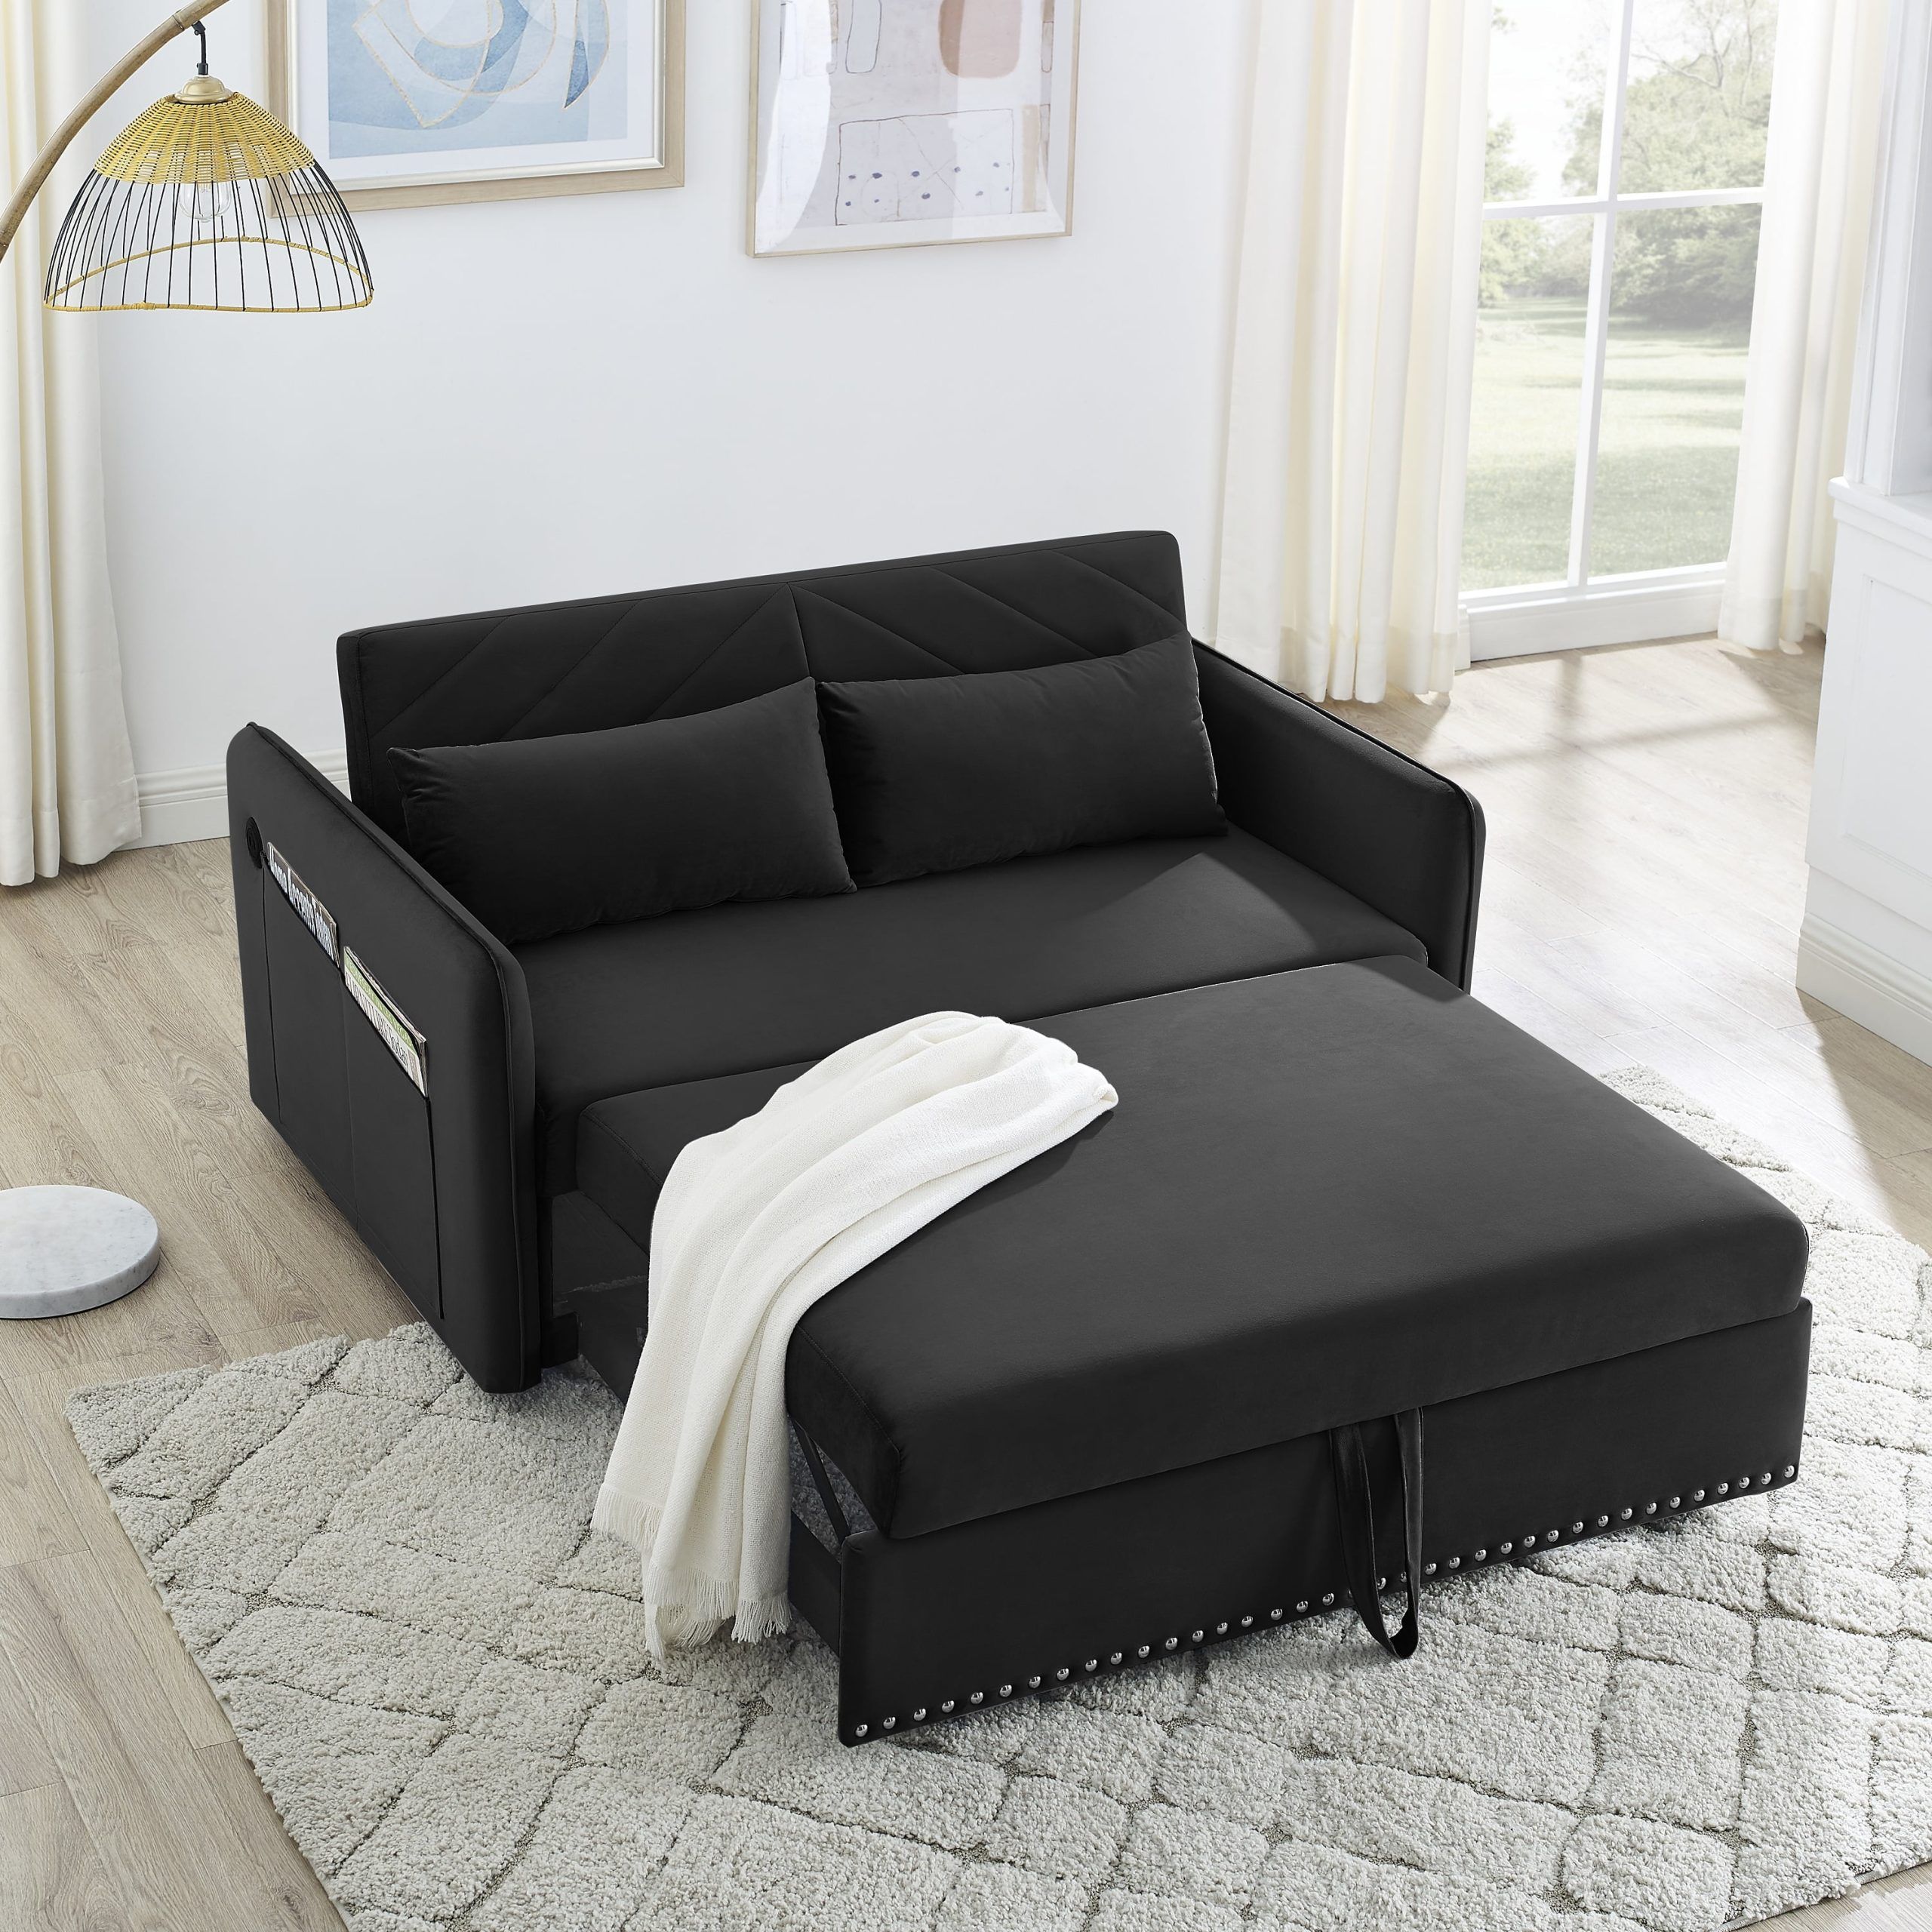 Momspeace 3 In 1 Sleeper Sofa Couch Bed With 2 Usb Ports, 55" Velvet  Convertible Loveseat With Pull Out Sofa Bed For Living Room – Black –  Walmart Regarding 3 In 1 Gray Pull Out Sleeper Sofas (View 5 of 15)